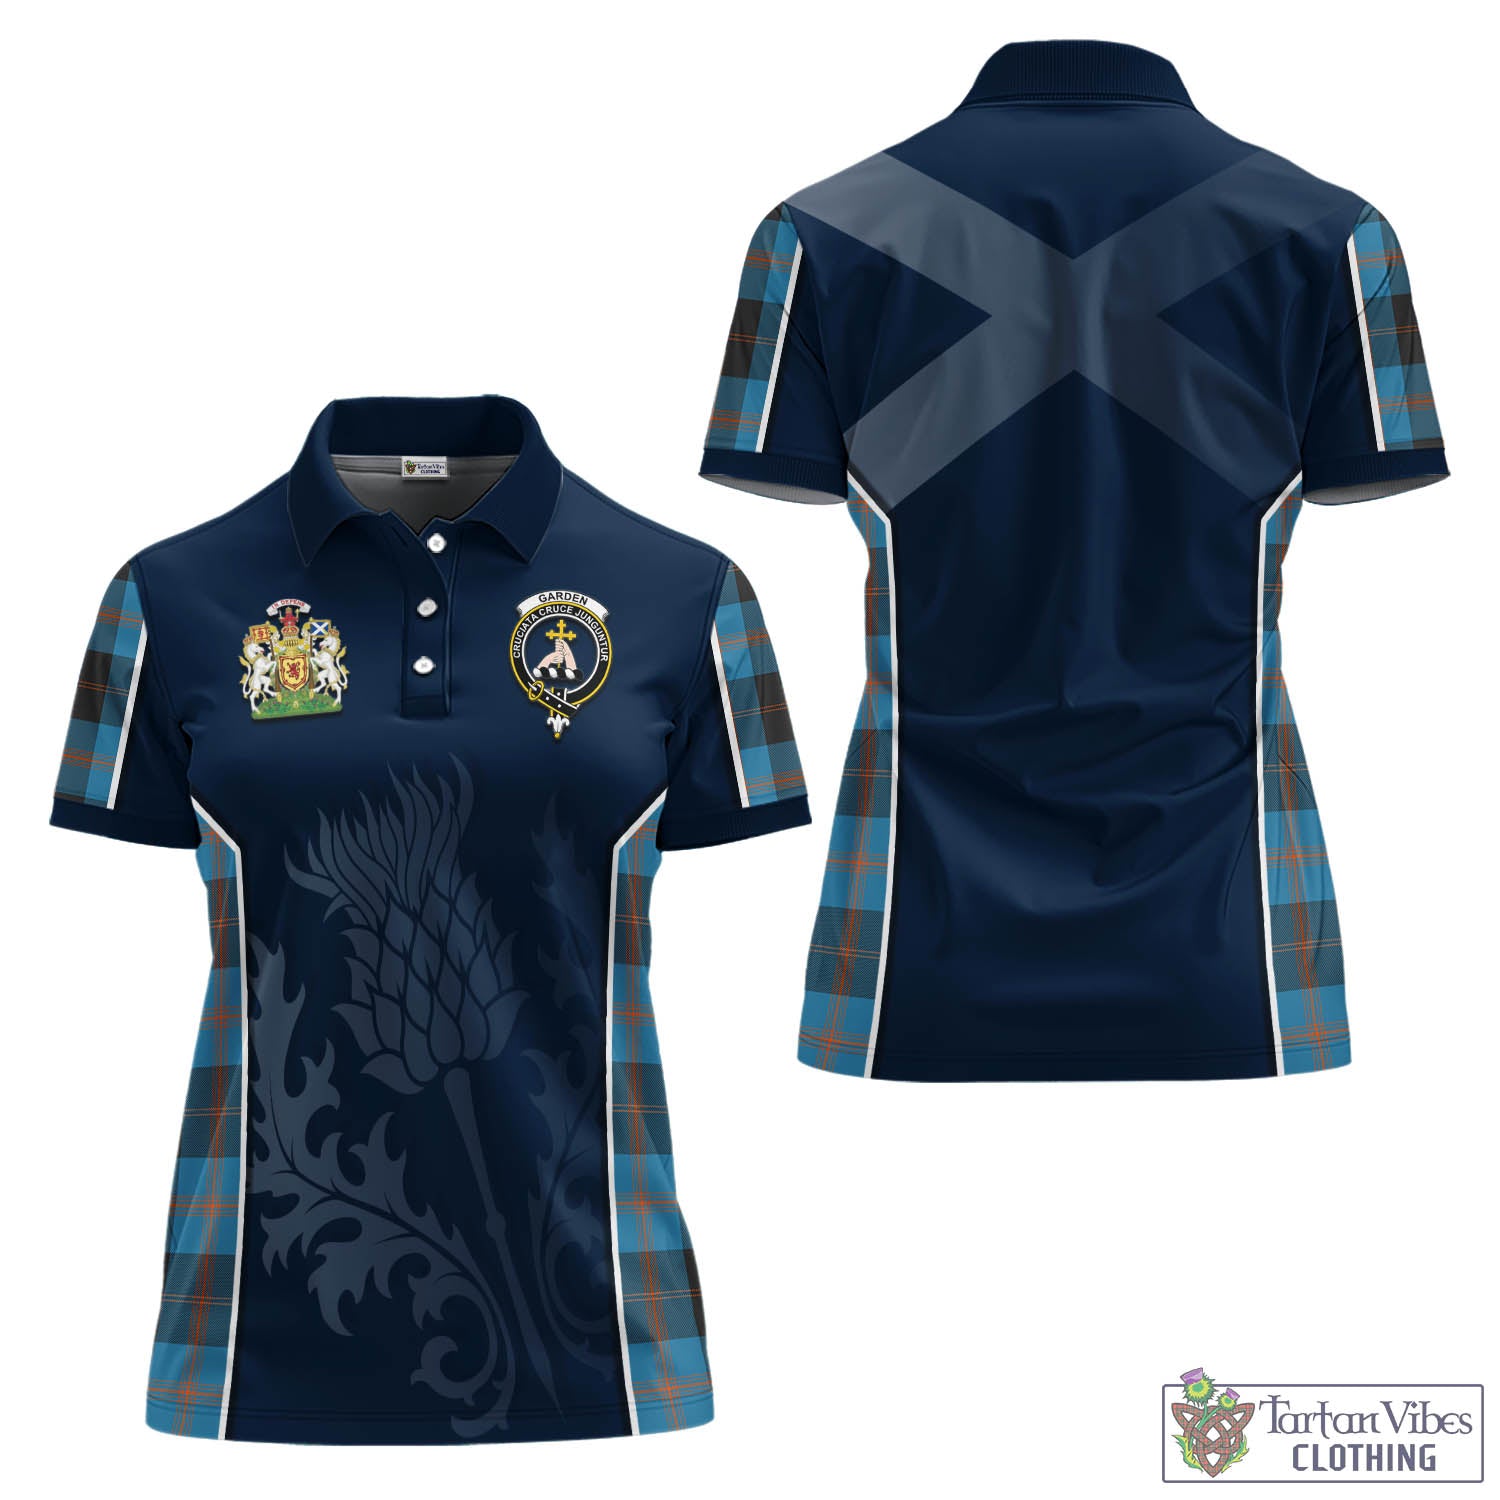 Tartan Vibes Clothing Garden Tartan Women's Polo Shirt with Family Crest and Scottish Thistle Vibes Sport Style